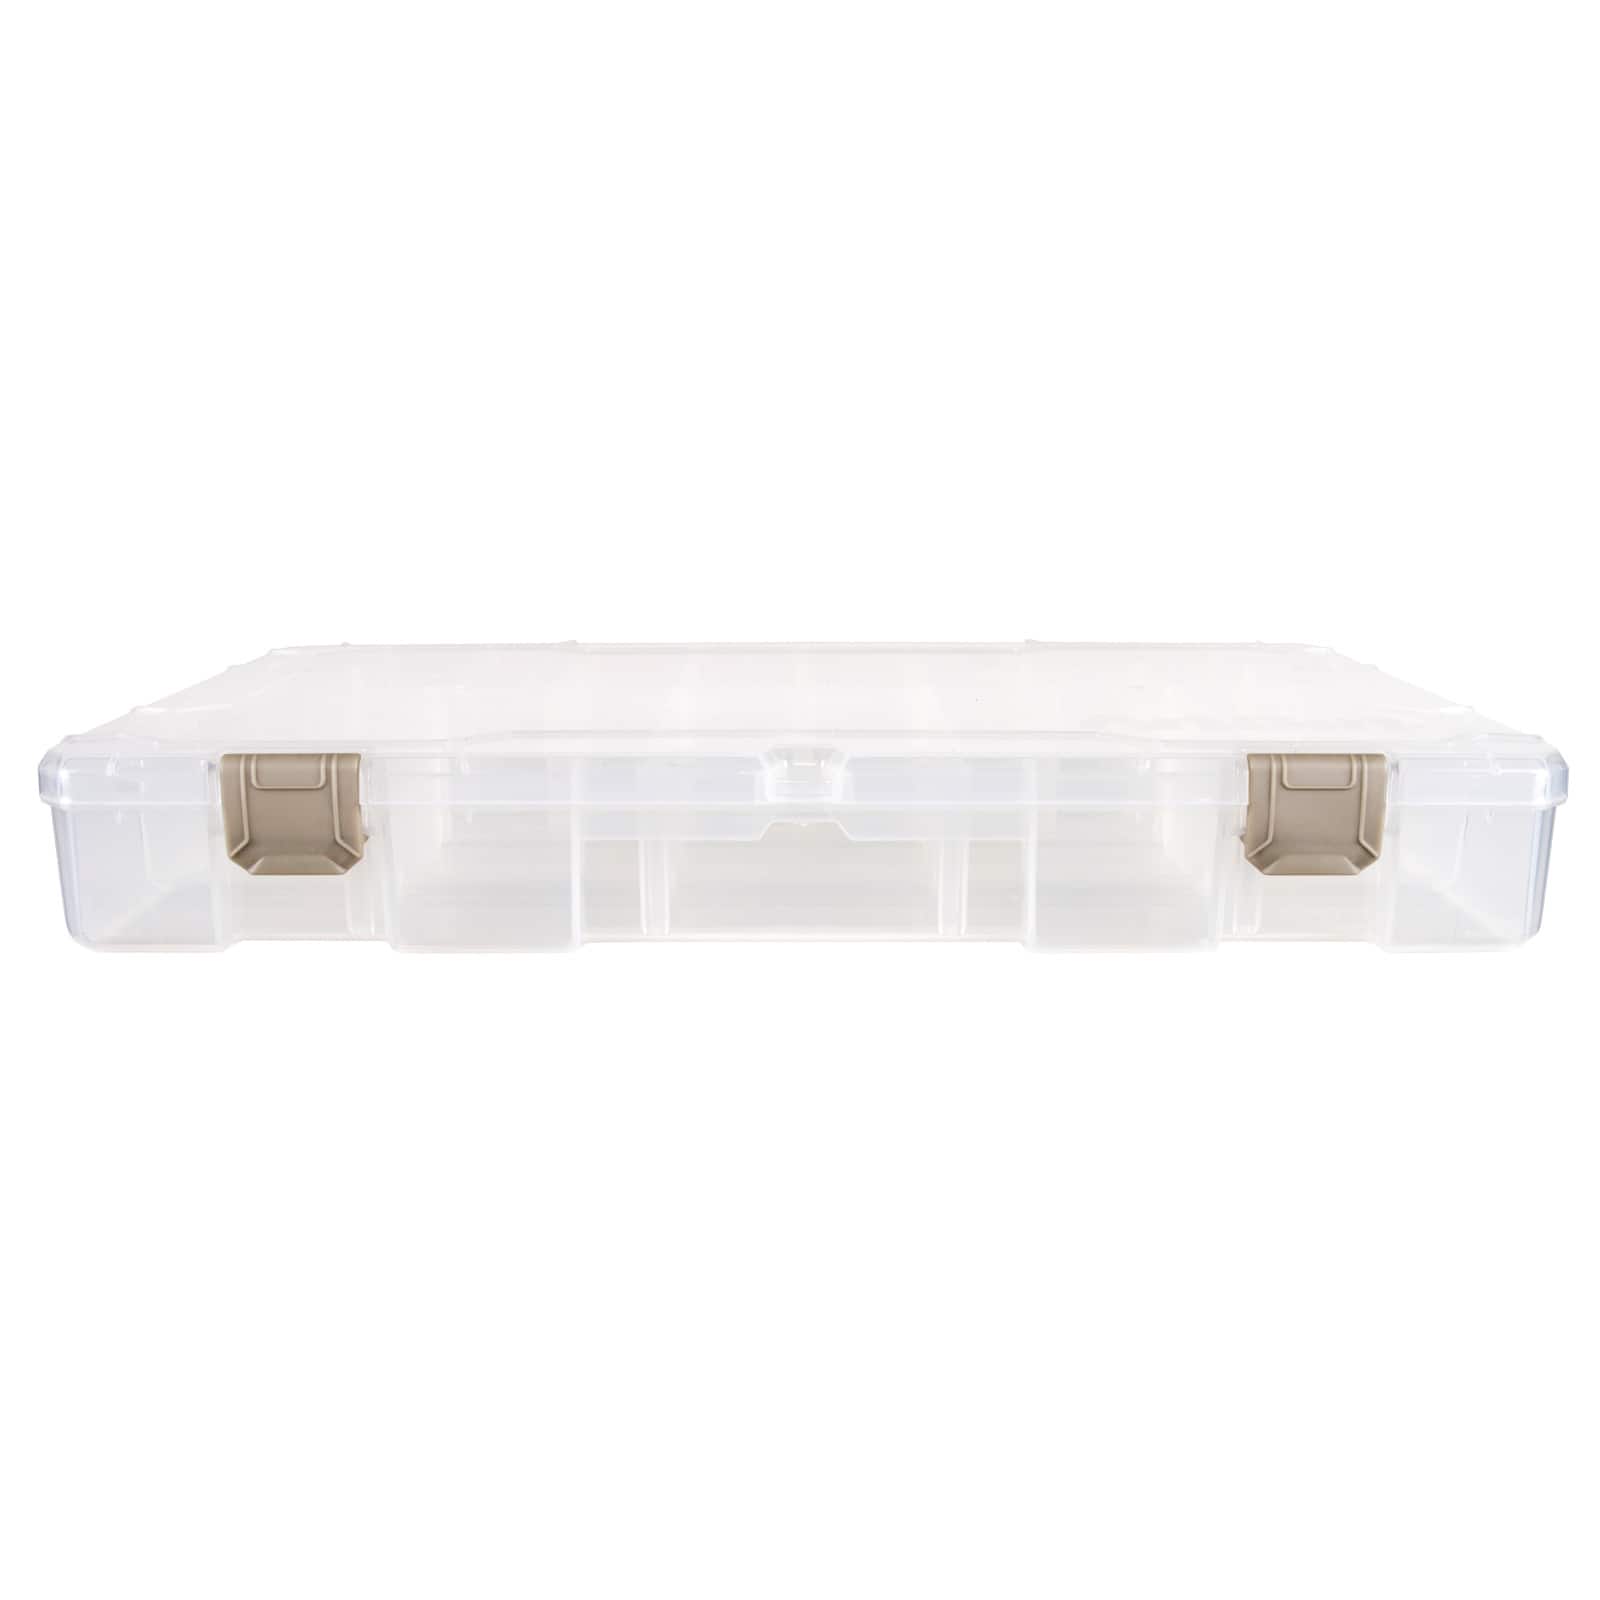 Large Adjustable Compartment Bead Storage Box with Handle by Bead Landing™, 14.7 x 12 x 2.3